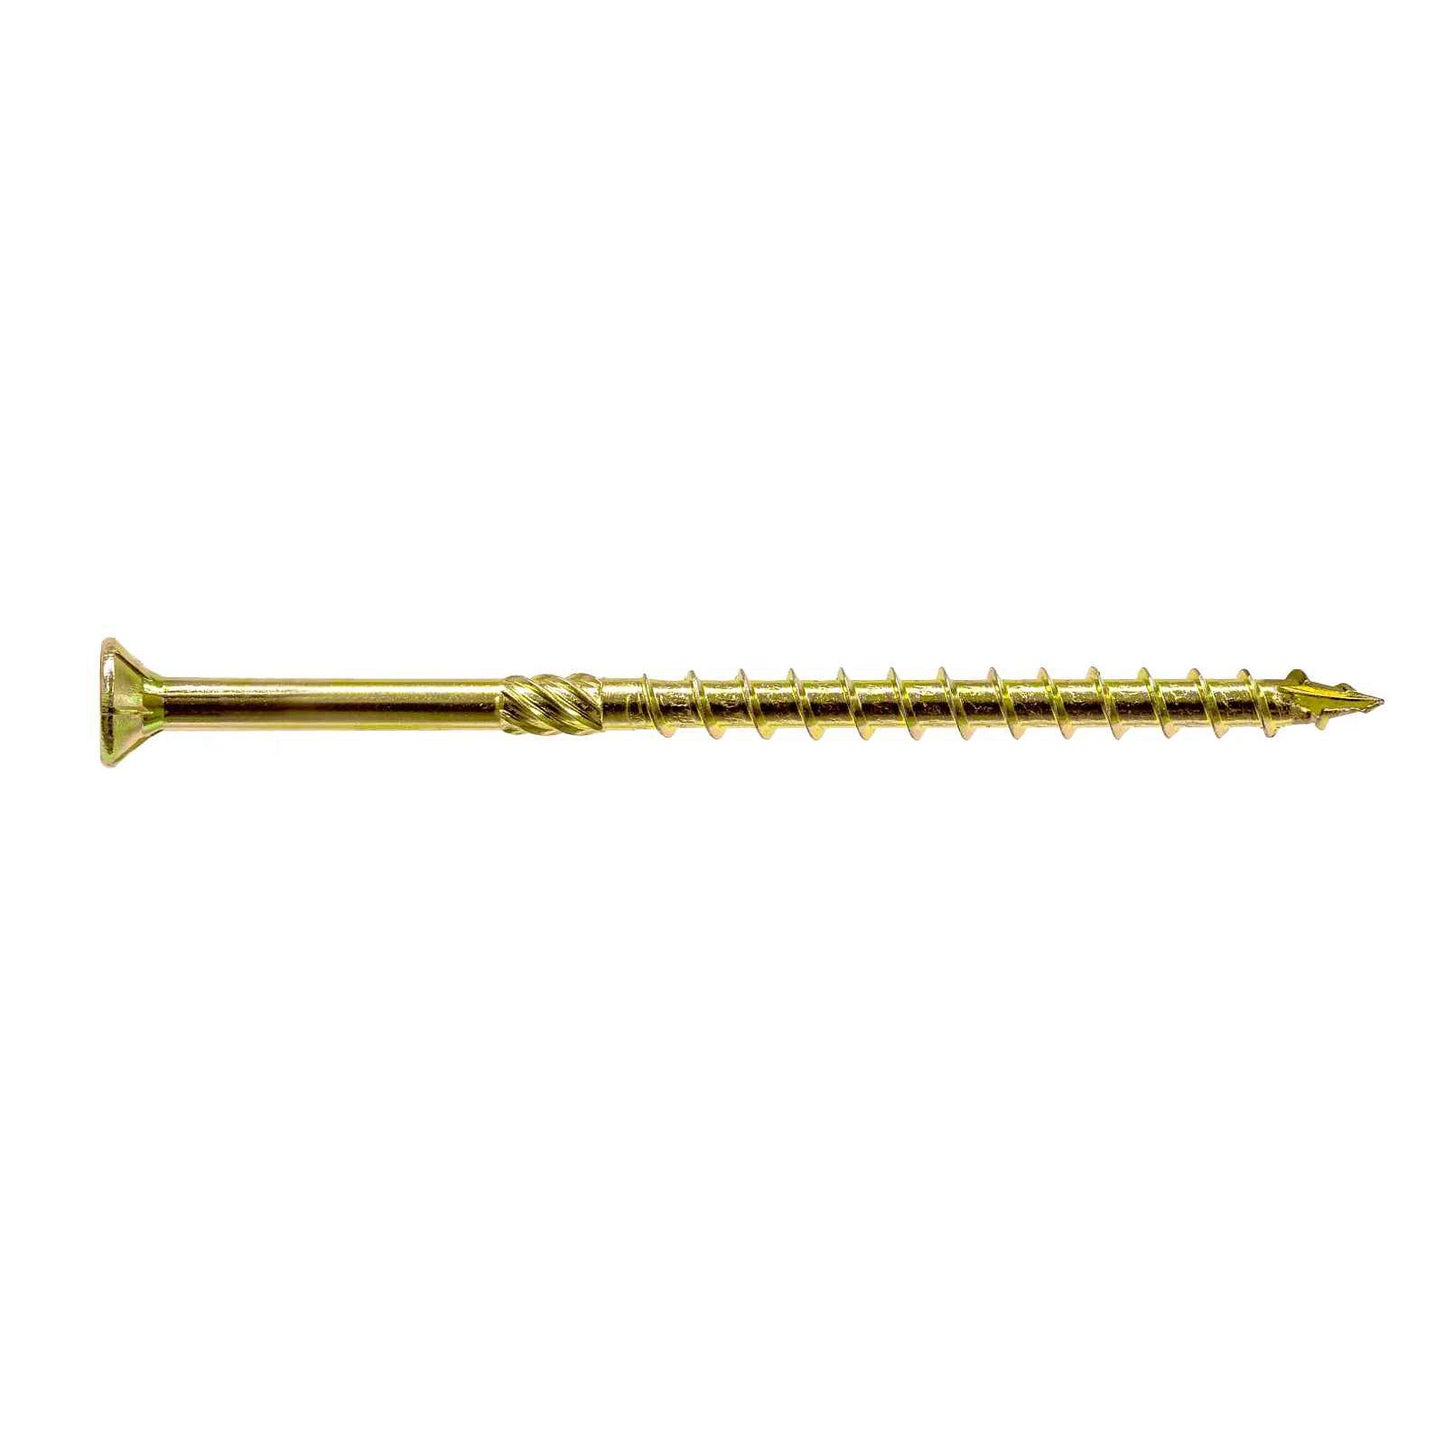 0.275" x 4" Strong-Drive SDCP Timber-CP Screw - Yellow Zinc